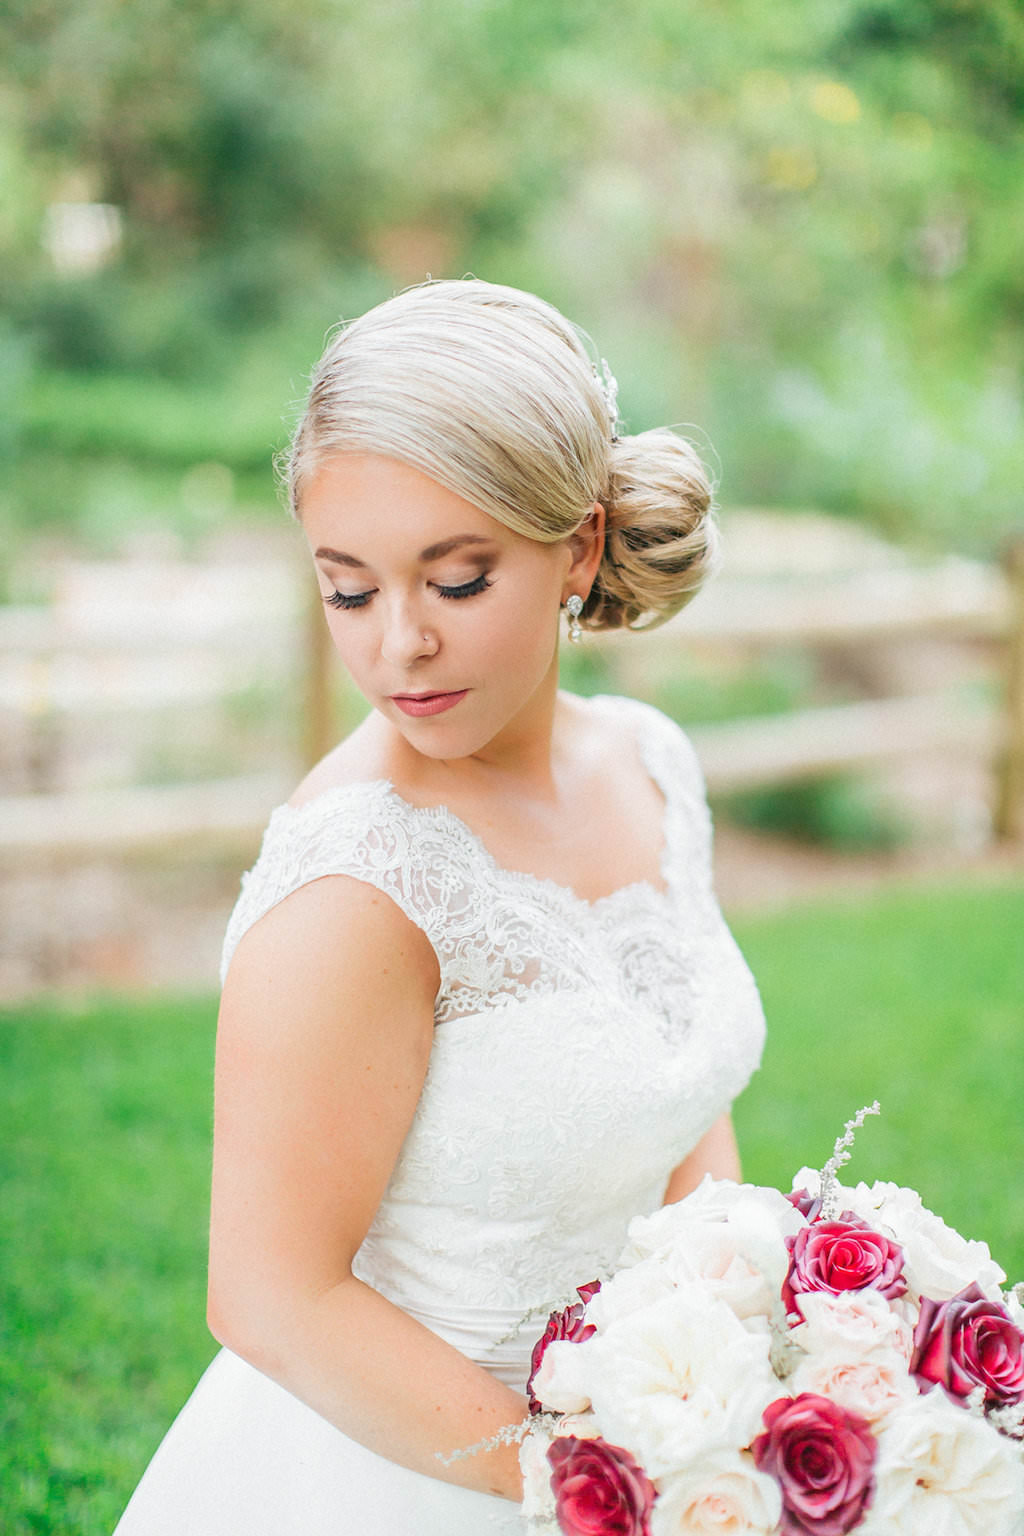 Outdoor Garden Bridal Portrait with Blush, Red, and Cream Rose Bouquet and Lace Wedding Dresses | Tampa Bay Wedding Photographer Rad Red Creative | Bridal Shop Truly Forever Bridal